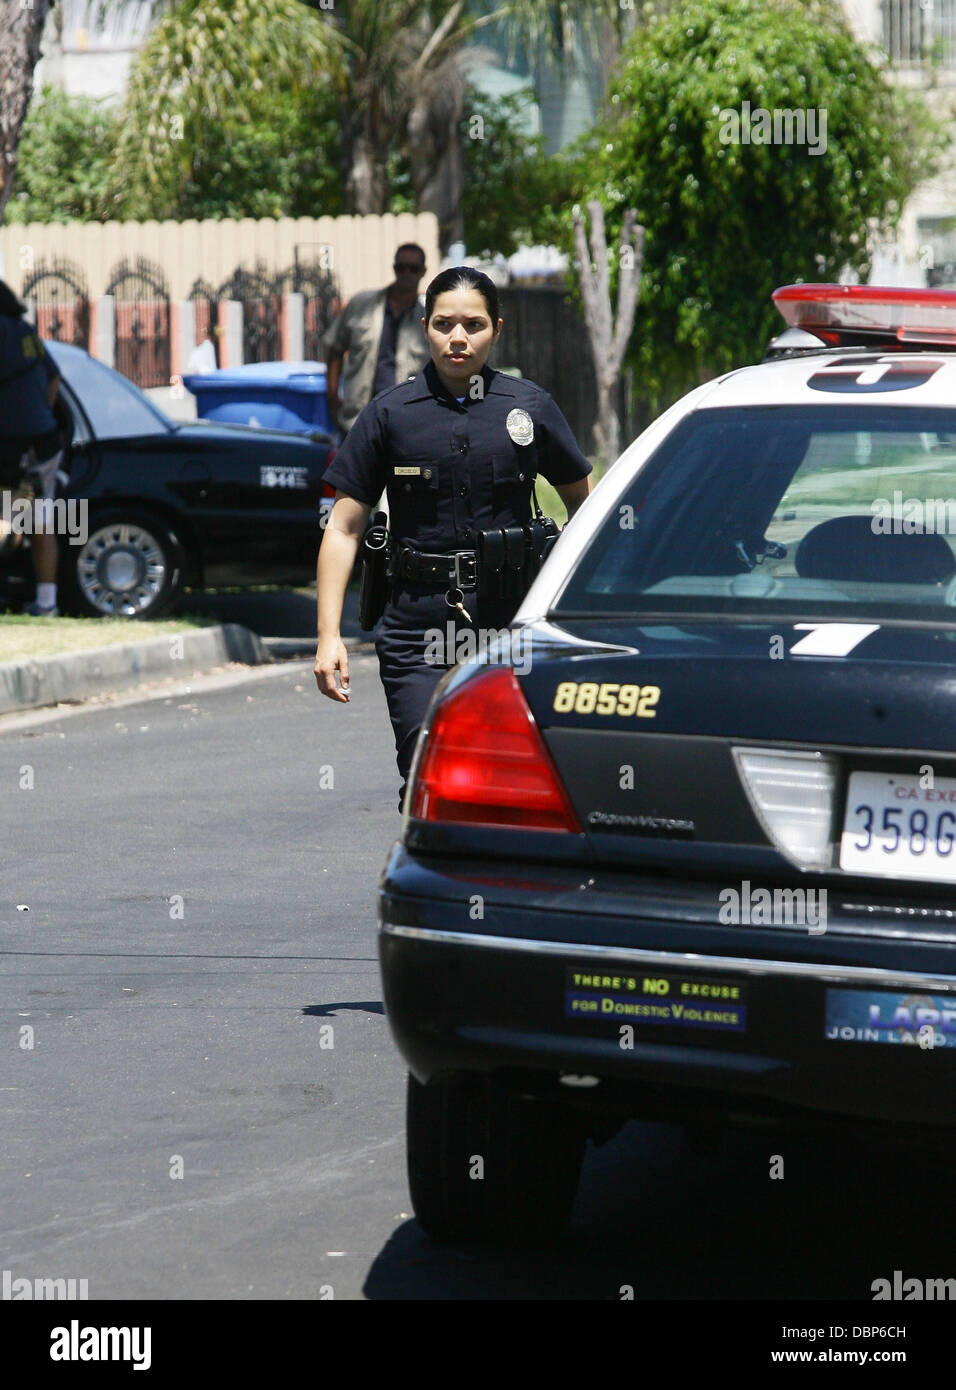 America Ferrera dons a policeman's uniform for her latest role, as she films on location in Los Angeles. 'End of Watch' is set to tell the story of the long-term friendship and partnership between two cops. Los Angeles, California - 03.08.11 Stock Photo